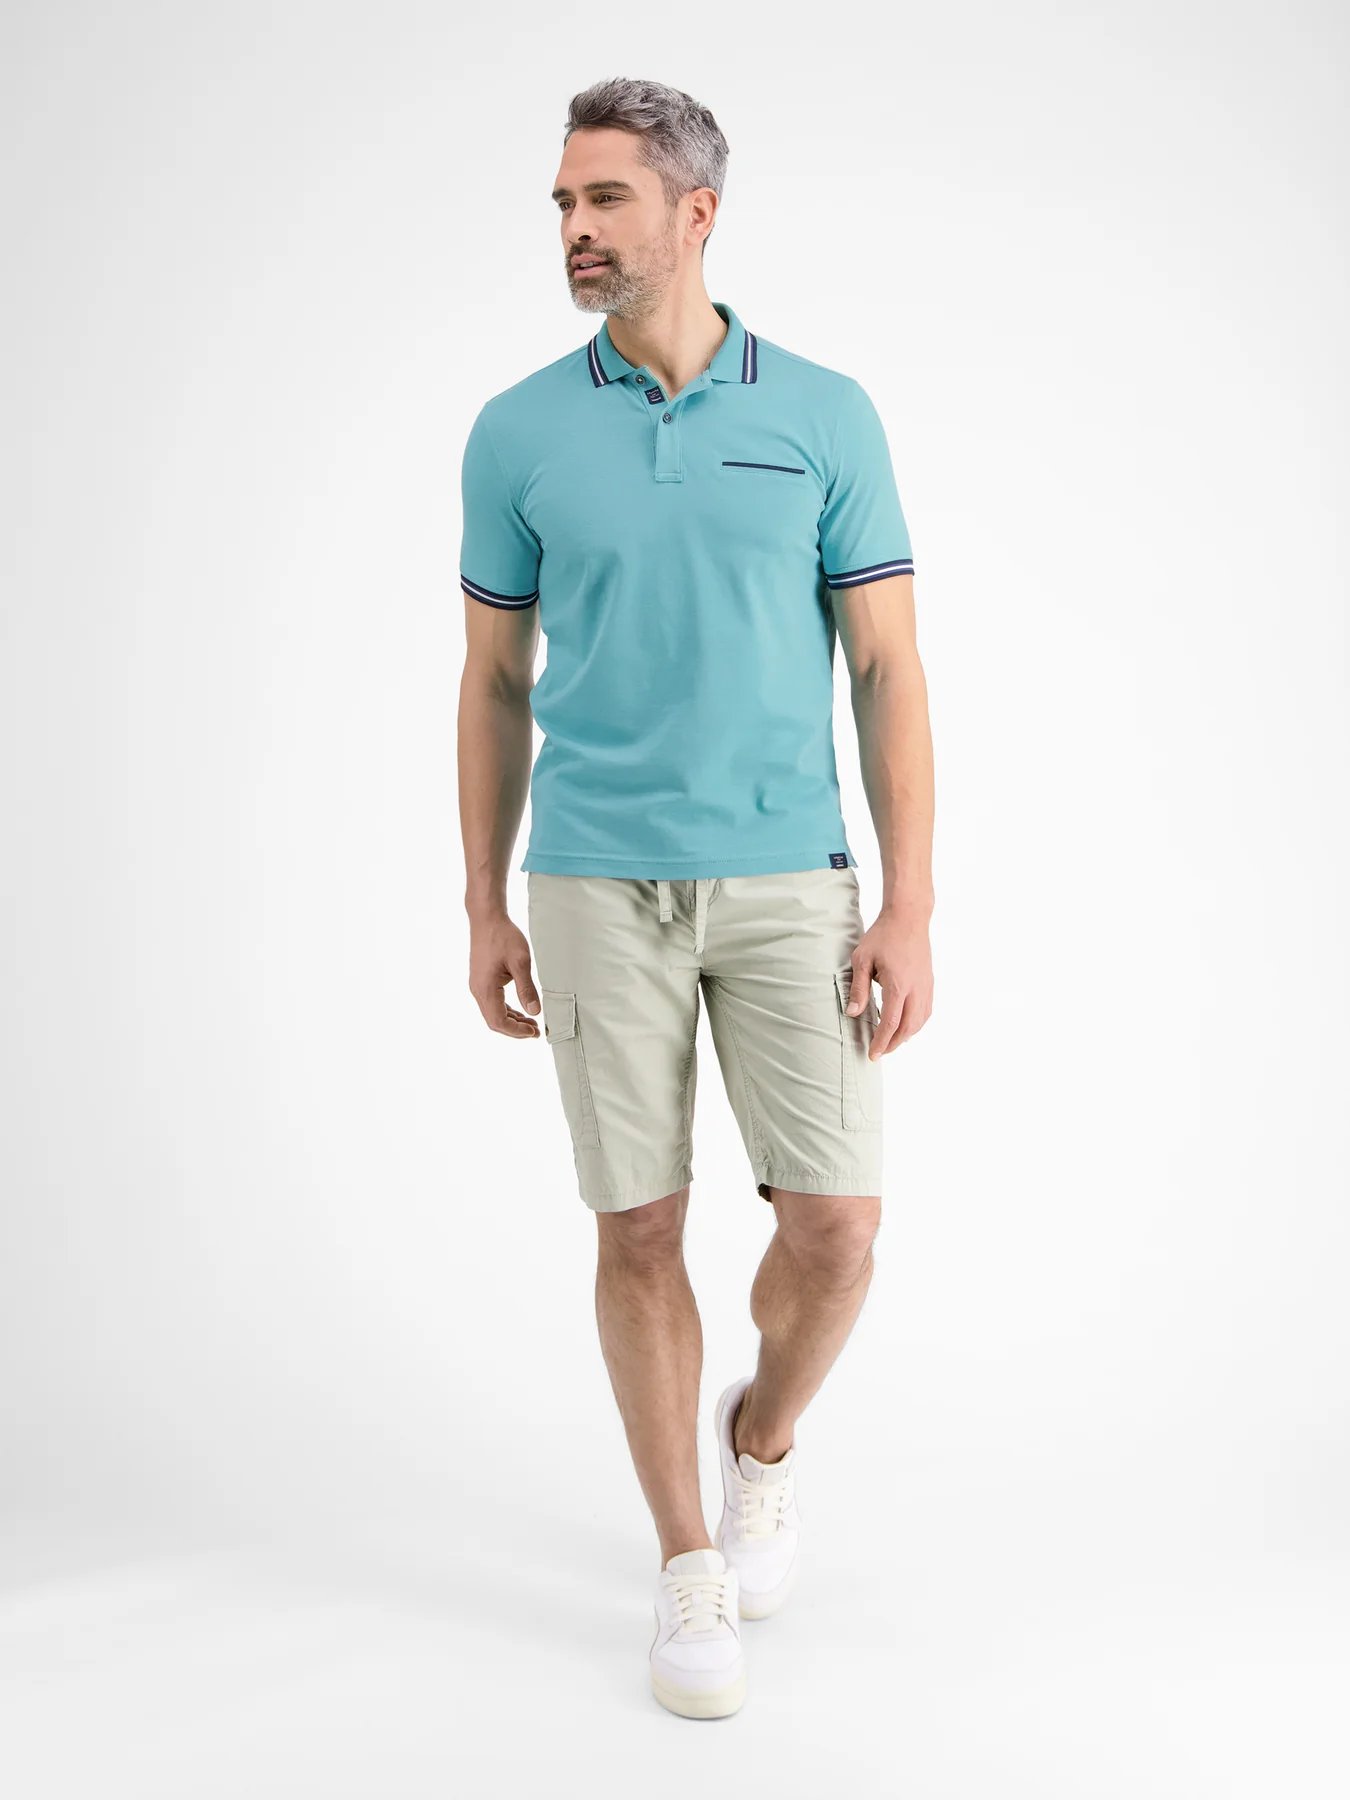 LERROS Poloshirt with Structure - Light | Turquoise Blues Cotton 